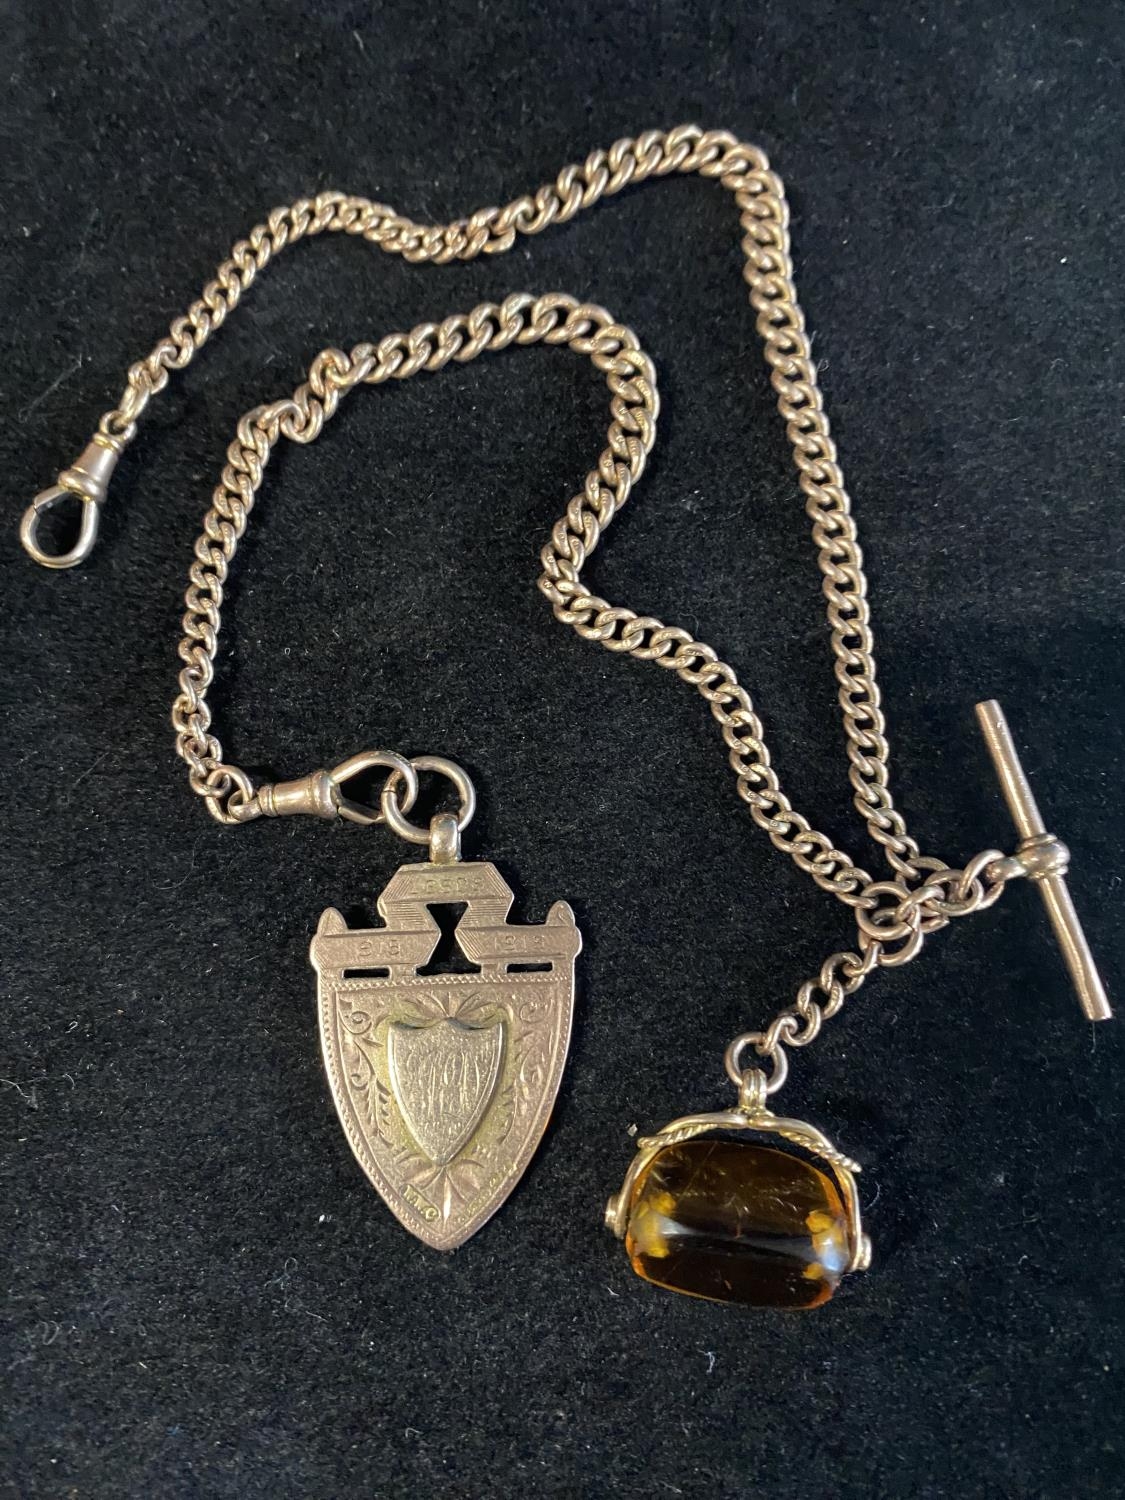 A 9ct gold double Albert chain with a spinning fob and a 9ct gold pendant, total weight 35.18g